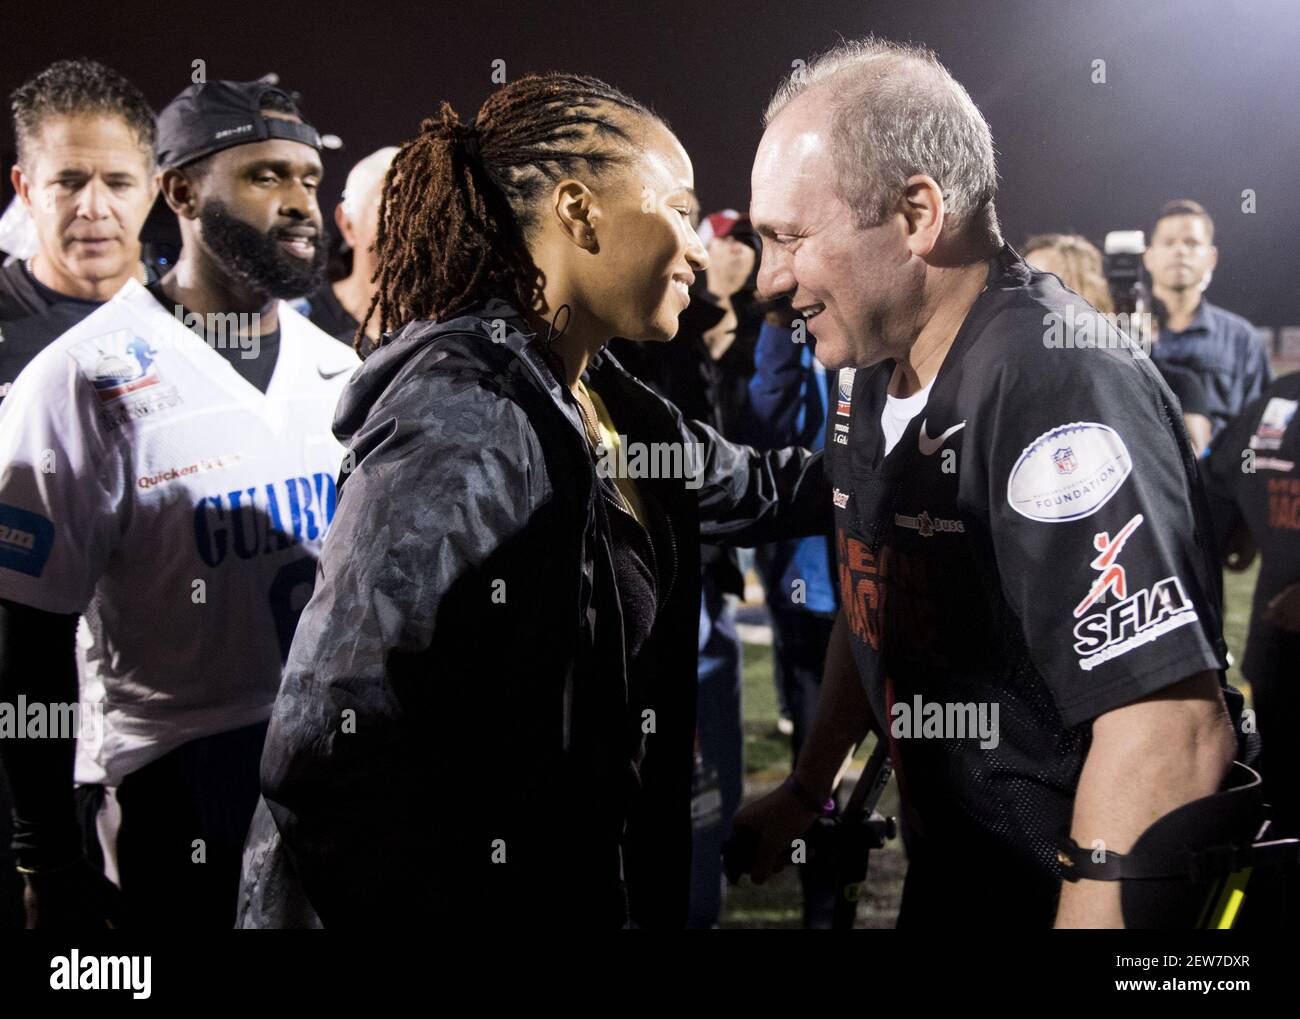 UNITED STATES - OCTOBER 11: Capitol Police officers David Bailey and Crystal Griner along with House Majority Whip Steve Scalise, R-La., participate in a halftime presentation during the Congressional Football Game at Gallaudet University in Washington on Wednesday, Oct. 11, 2017. The game featured the Capitol Police team The Guards vs the Congressional team The Mean Machine. (Photo By Bill Clark/CQ Roll Call) Stock Photo